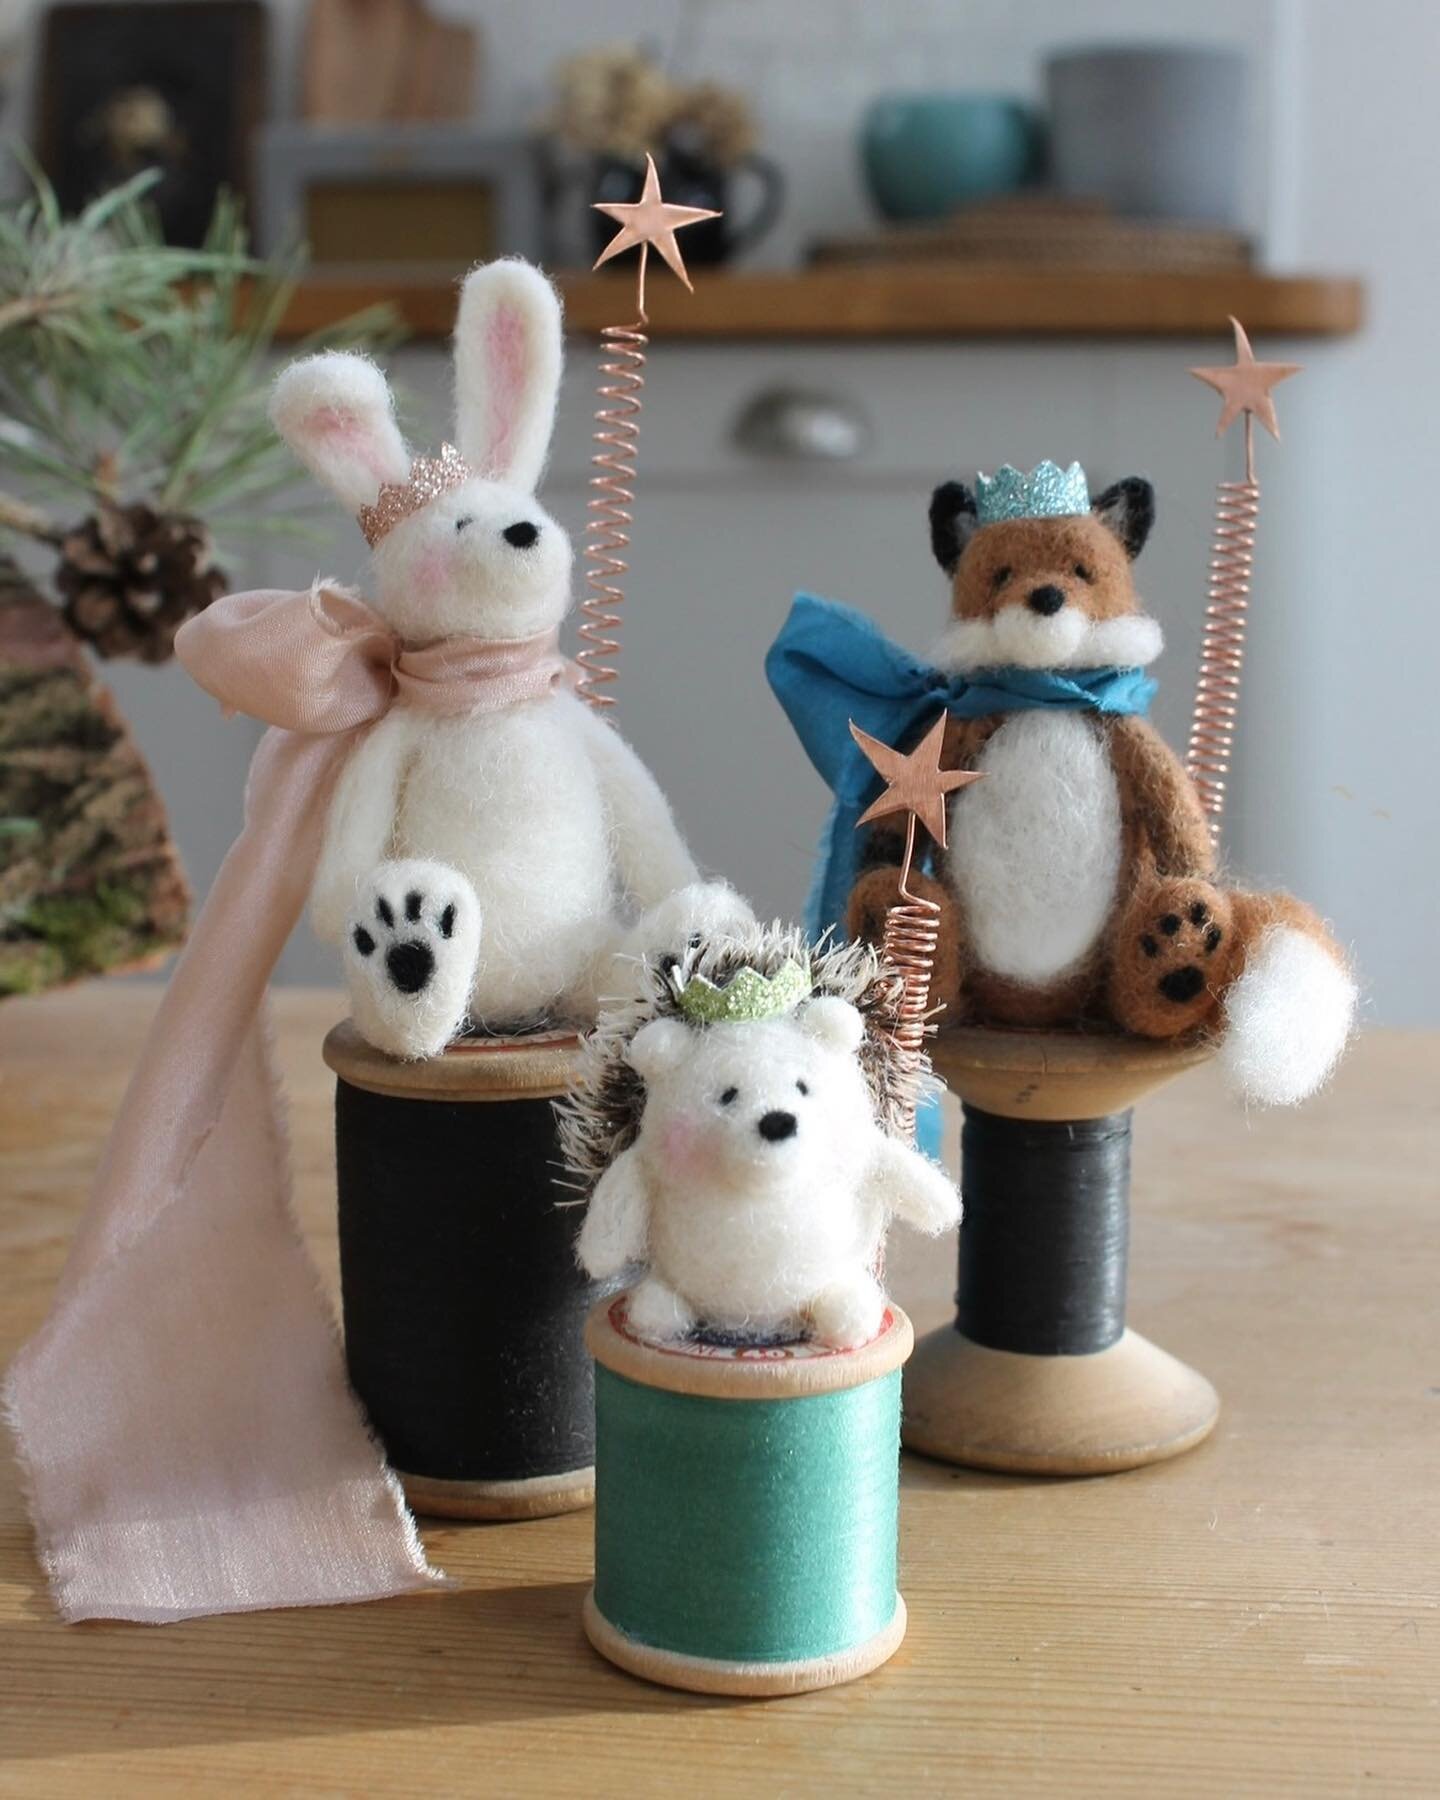 💕Happy Friday💕. 

Just a little throwback of little characters to make you smile. Have a lovely Friday and weekend. I&rsquo;m at the painting table today 💕💕💕. 

#foxes #fox #foxcub #hedgehog #rabbits #bunny #needlefelt #originalcharacters #paint